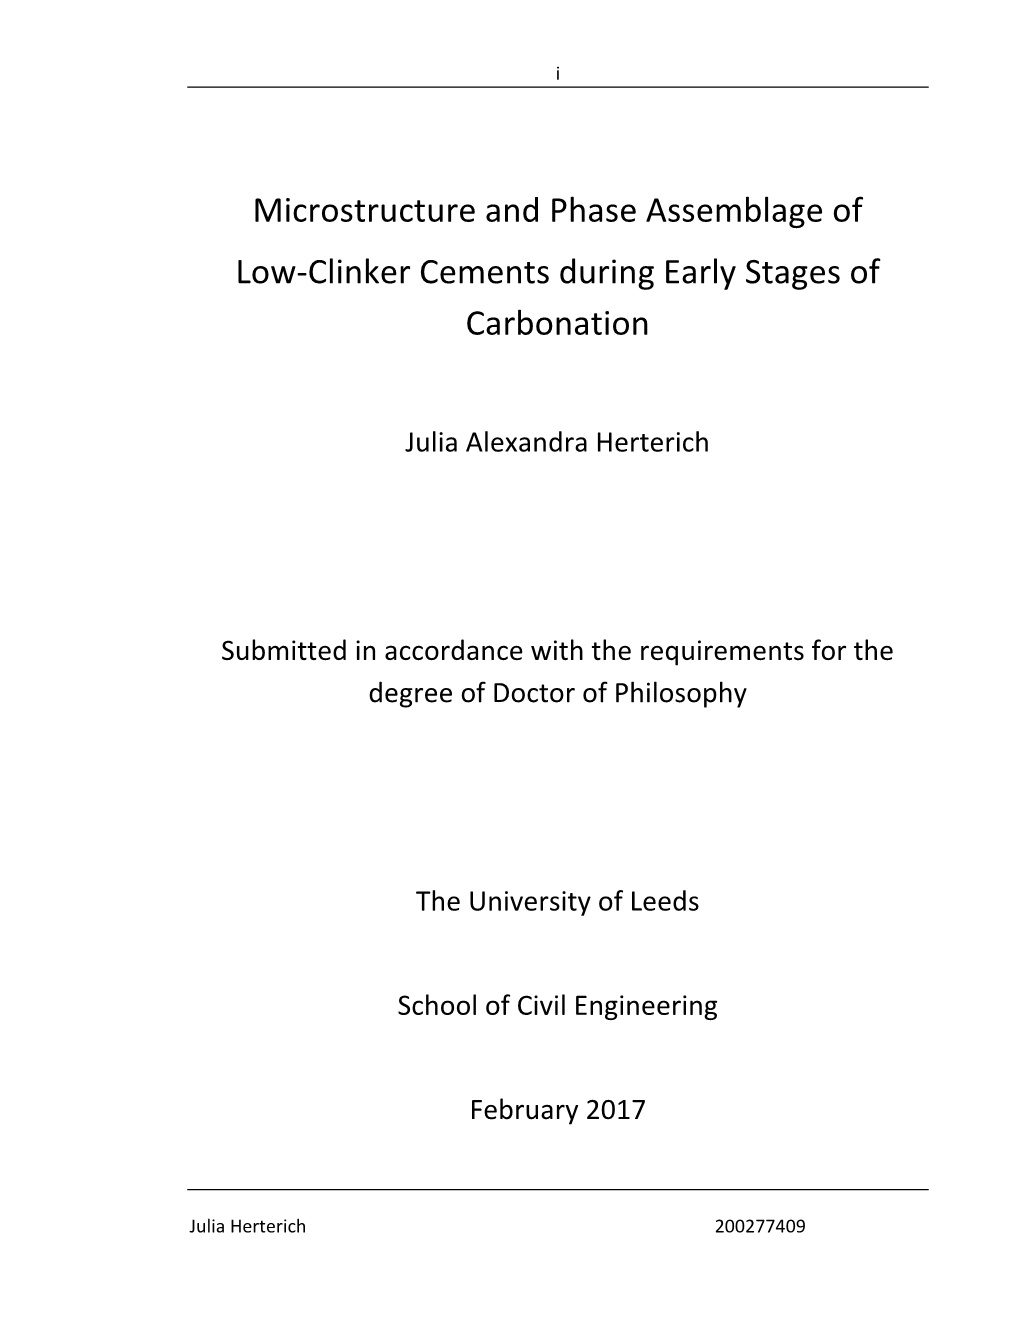 Microstructure and Phase Assemblage of Low-Clinker Cements During Early Stages of Carbonation